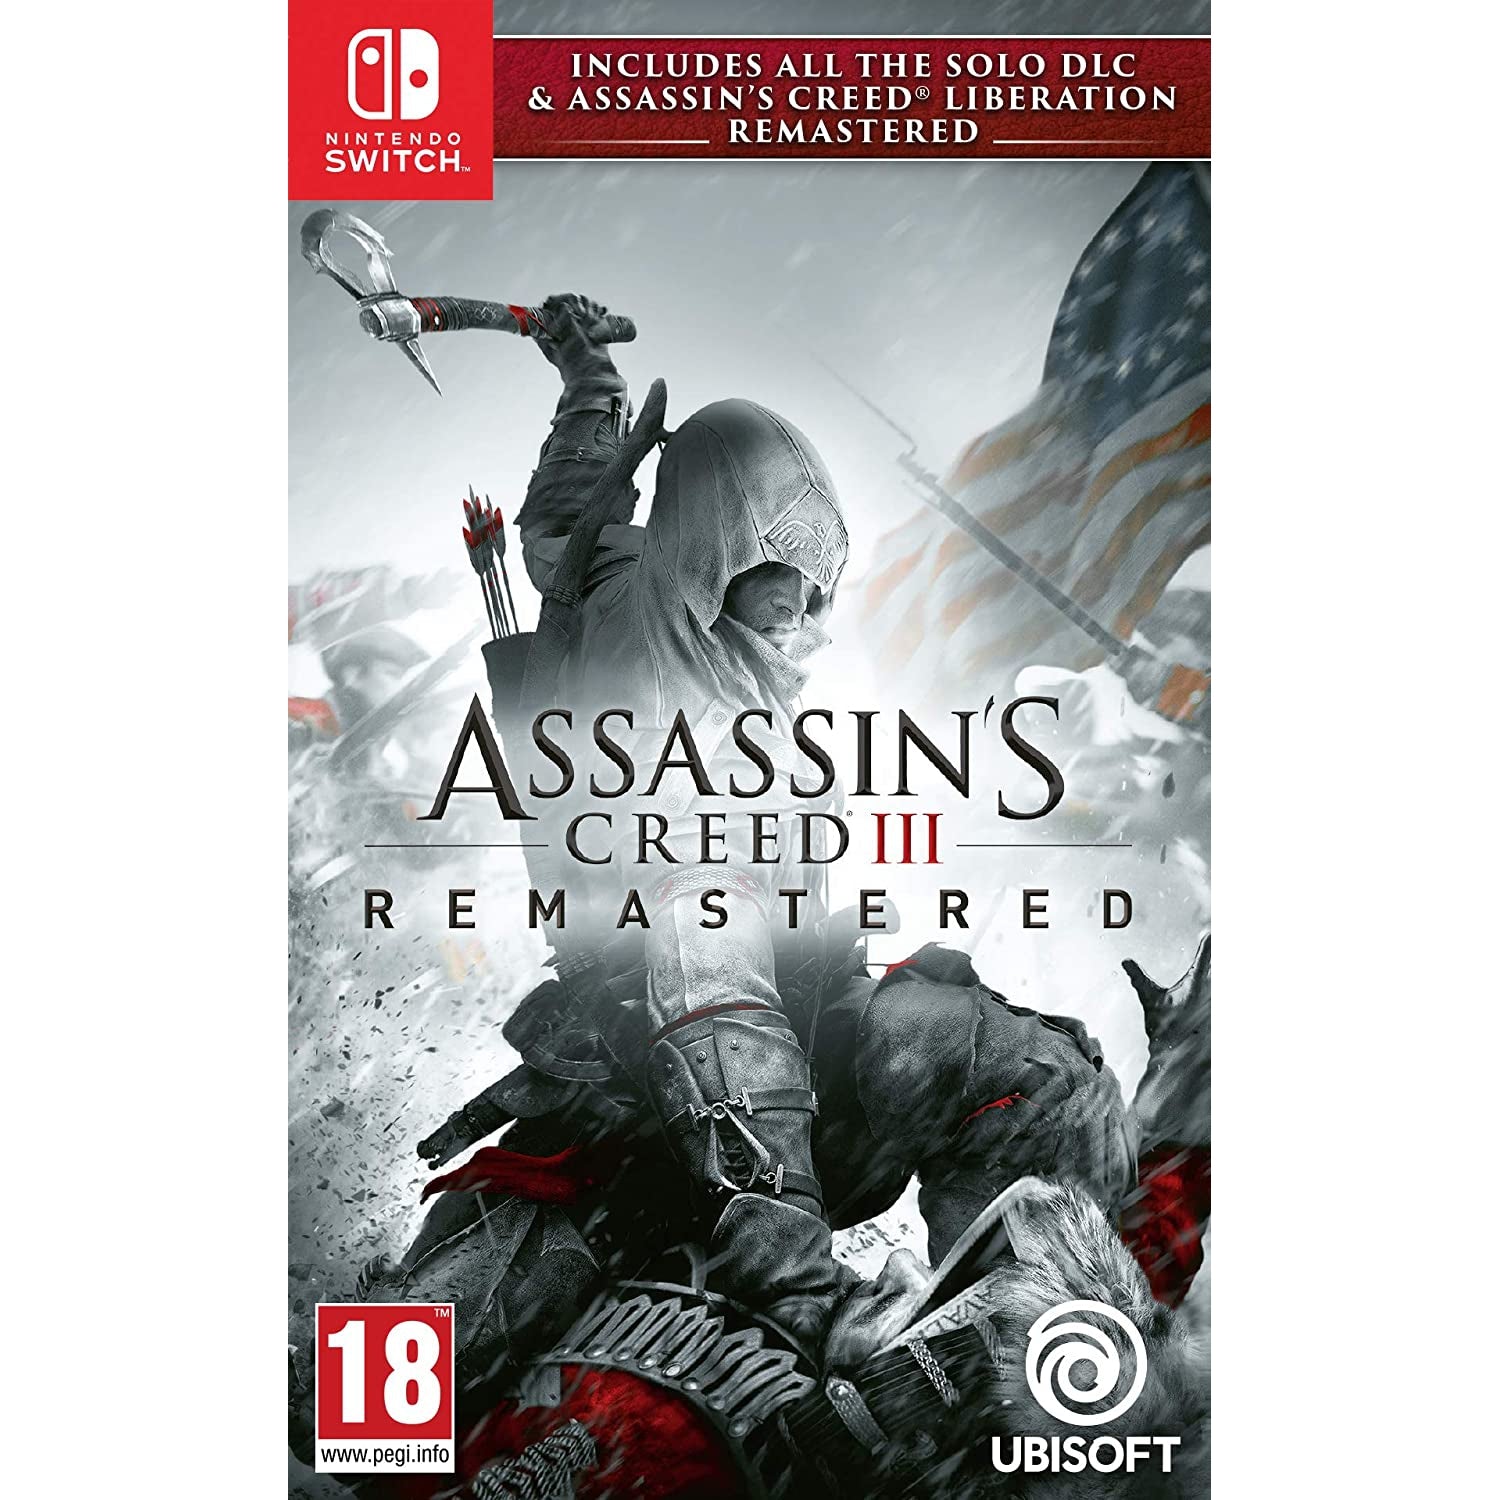 Assassin's Creed III Remastered (Nintendo Switch) - New